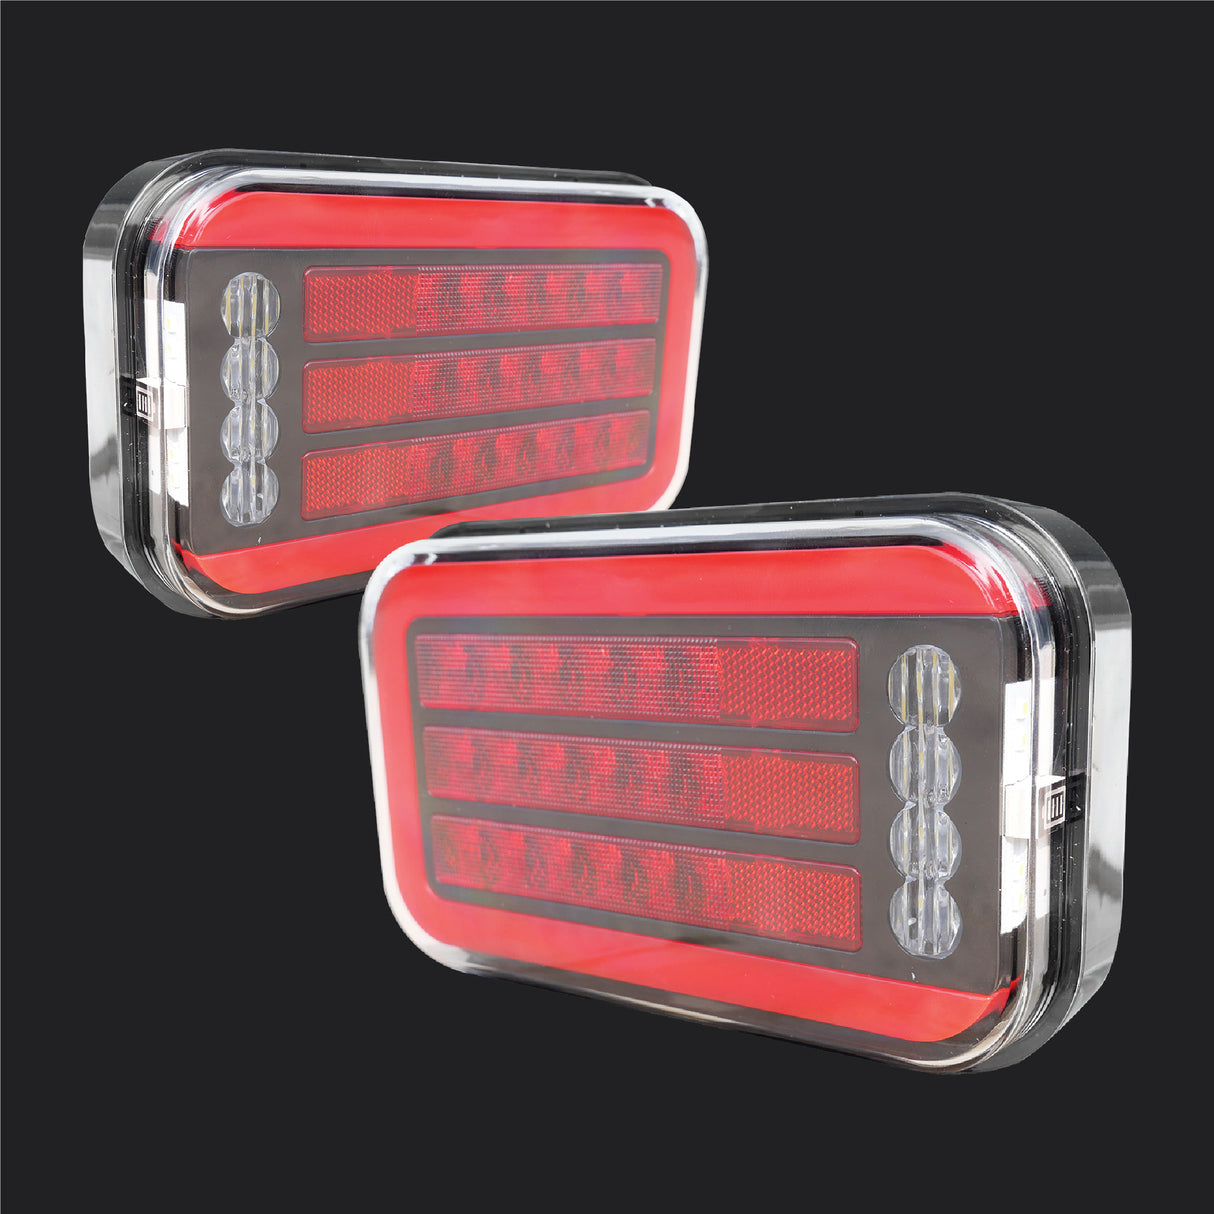 EL703 LED Wireless Trailer Light with Battery Life Display